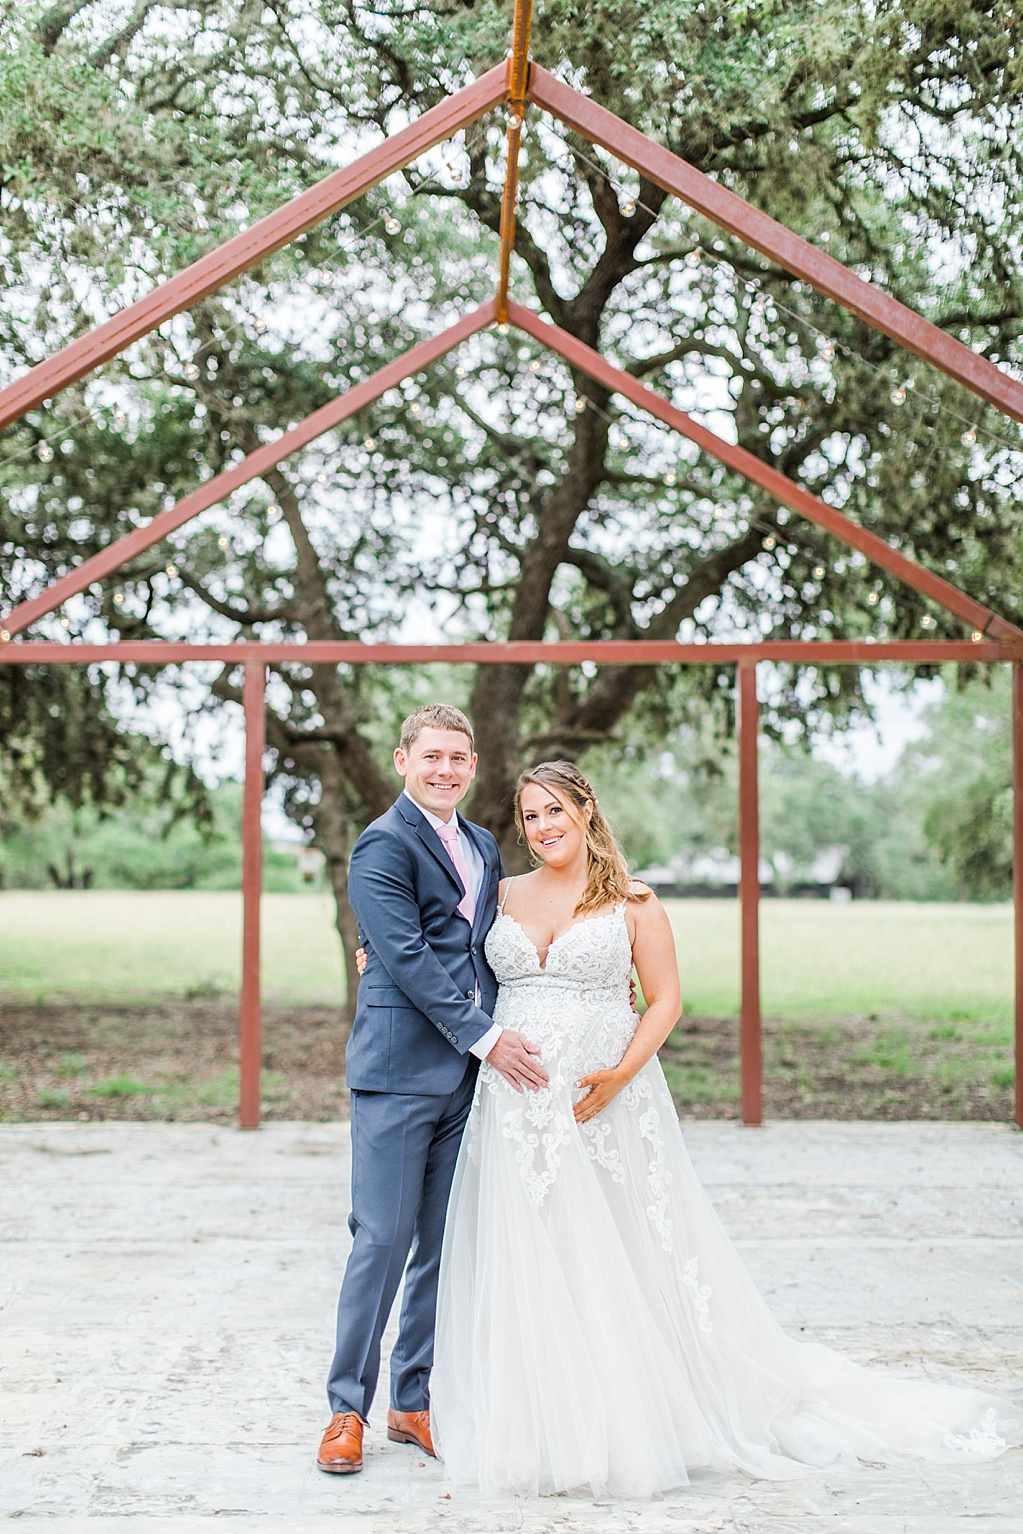 The Oaks at Boerne Wedding Photos by Allison Jeffers Photography 0029